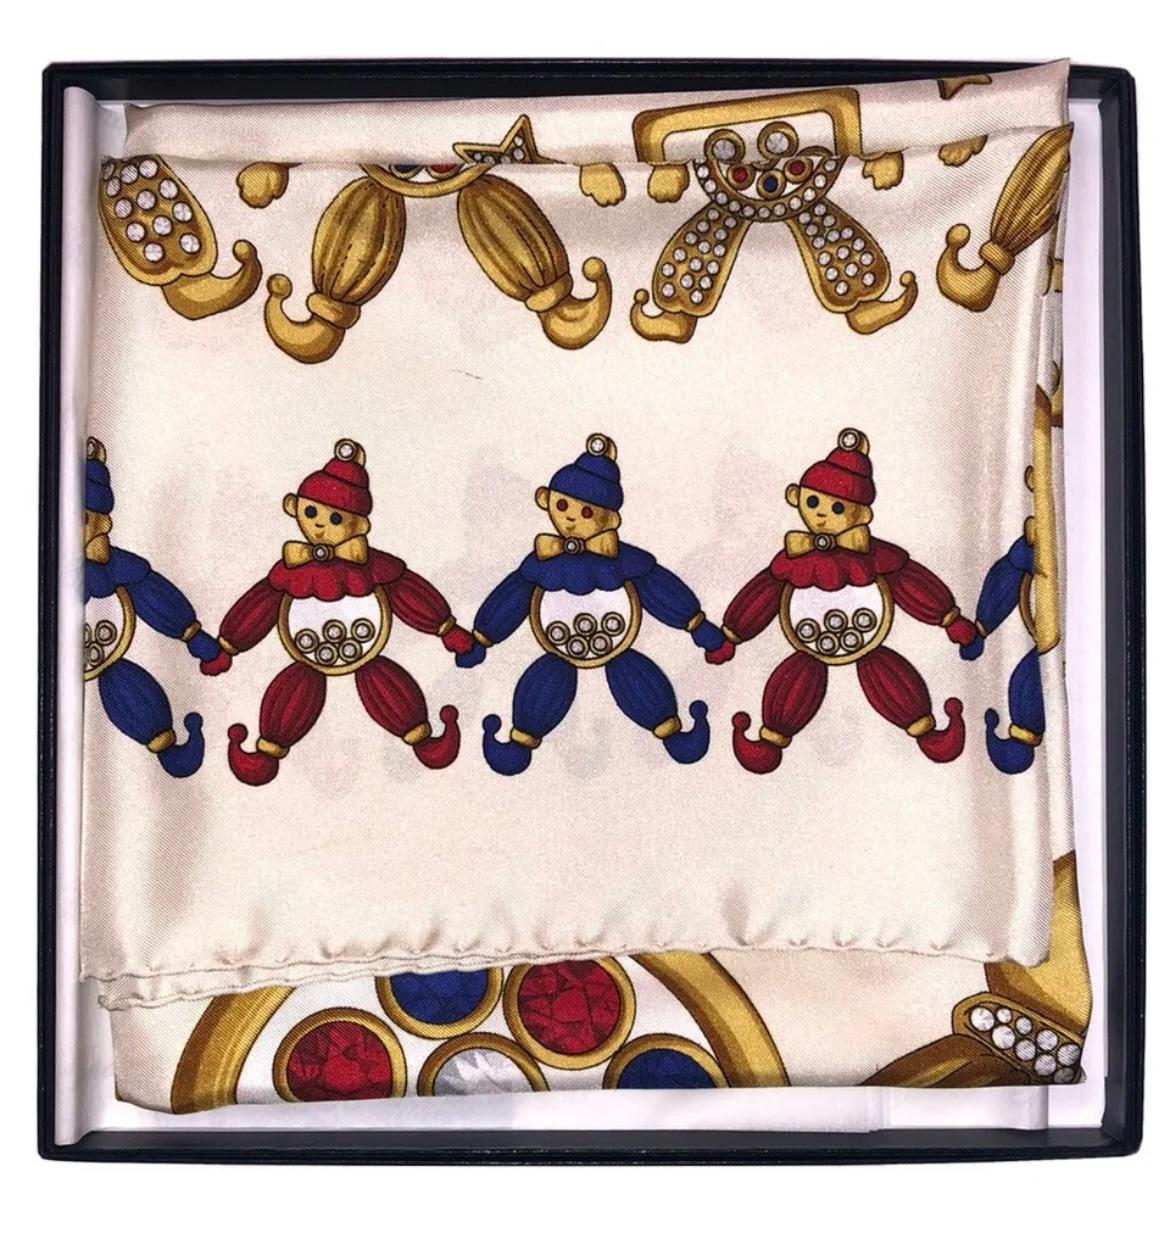 Chopard Silk Scarf 90 Cm W/ Red, Blue & Gold Jesters In New Condition For Sale In Carmel, CA